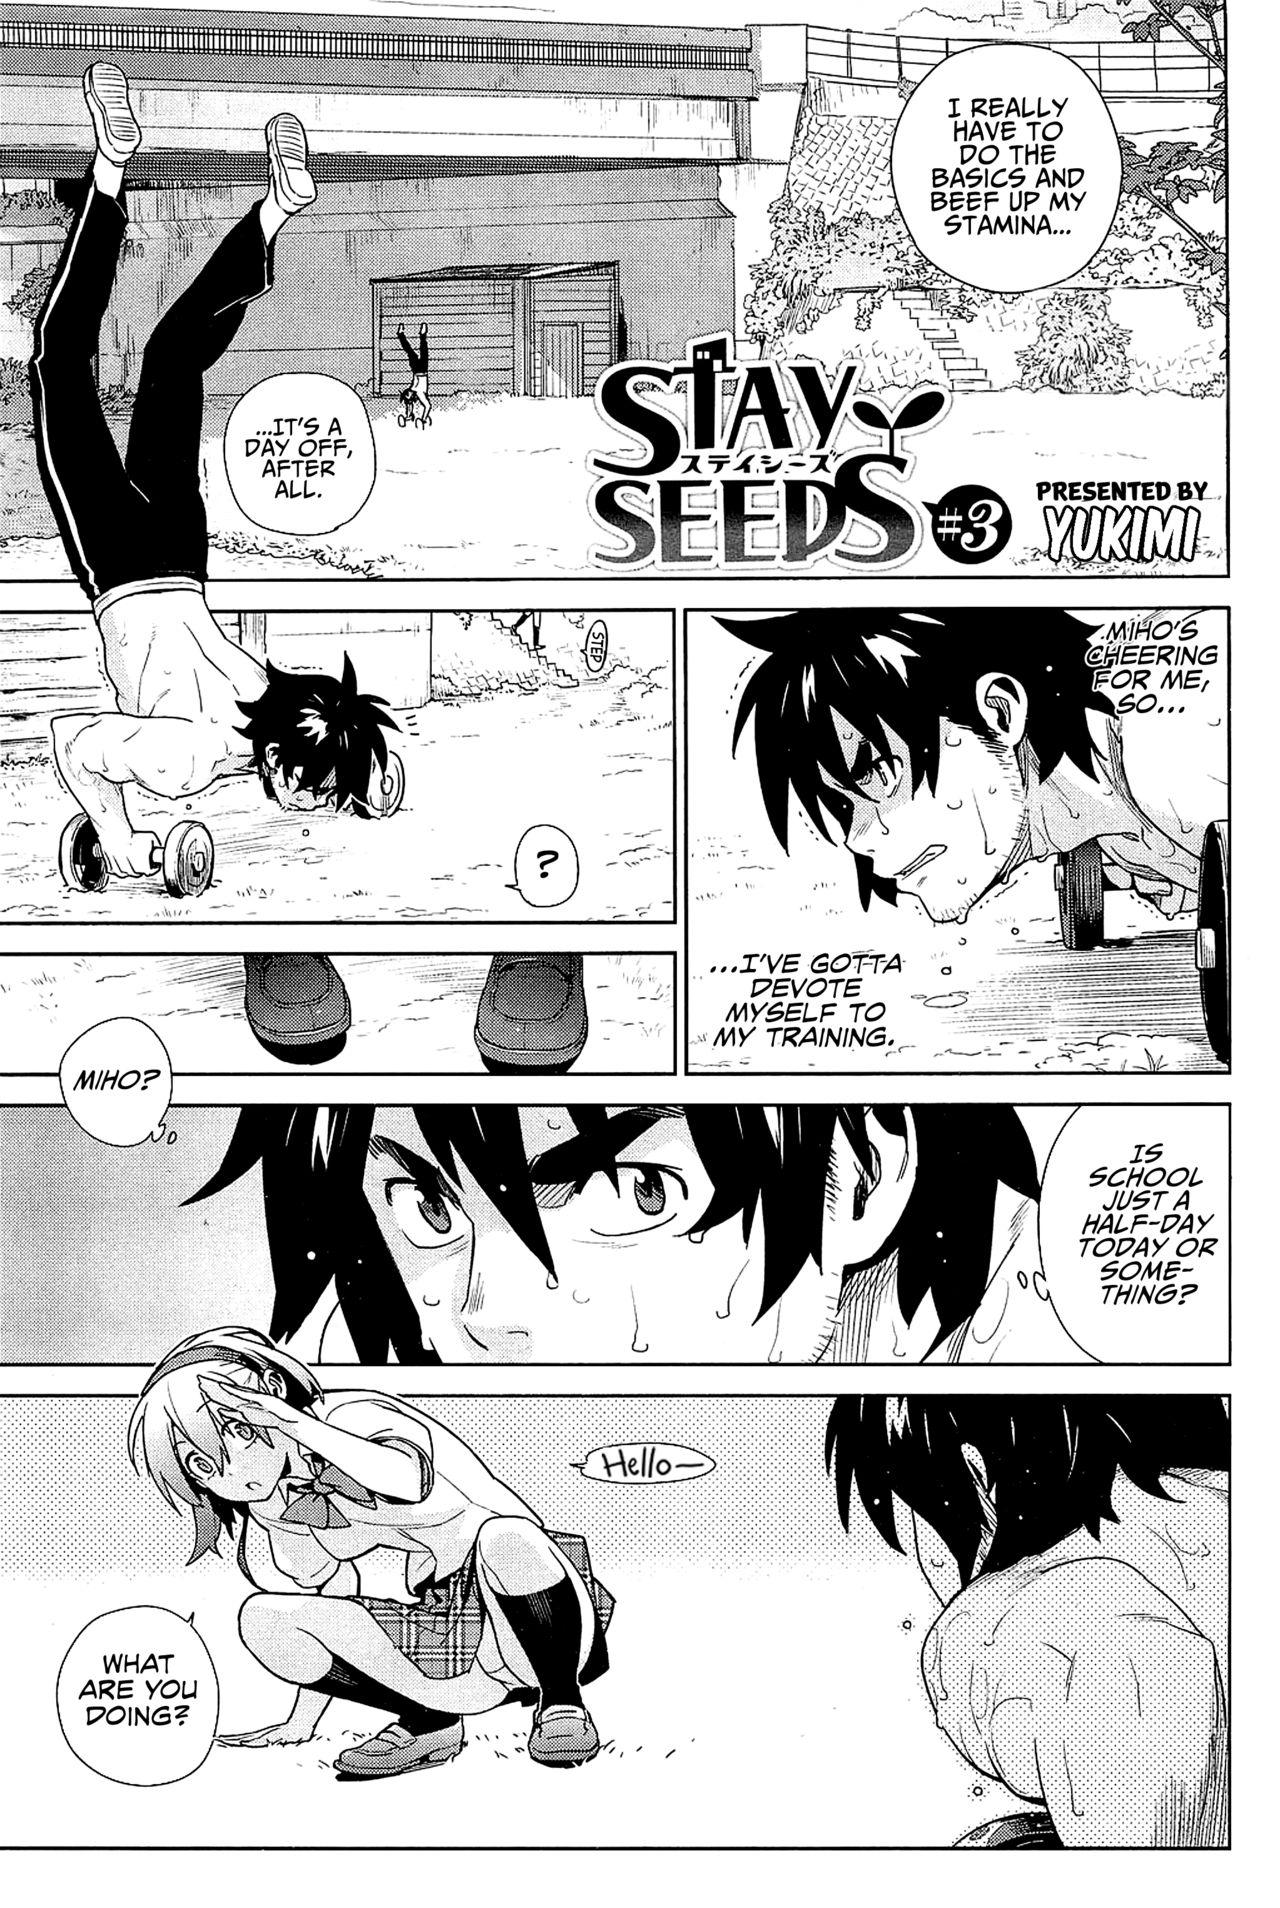 Stay Seeds Chapter 3 0